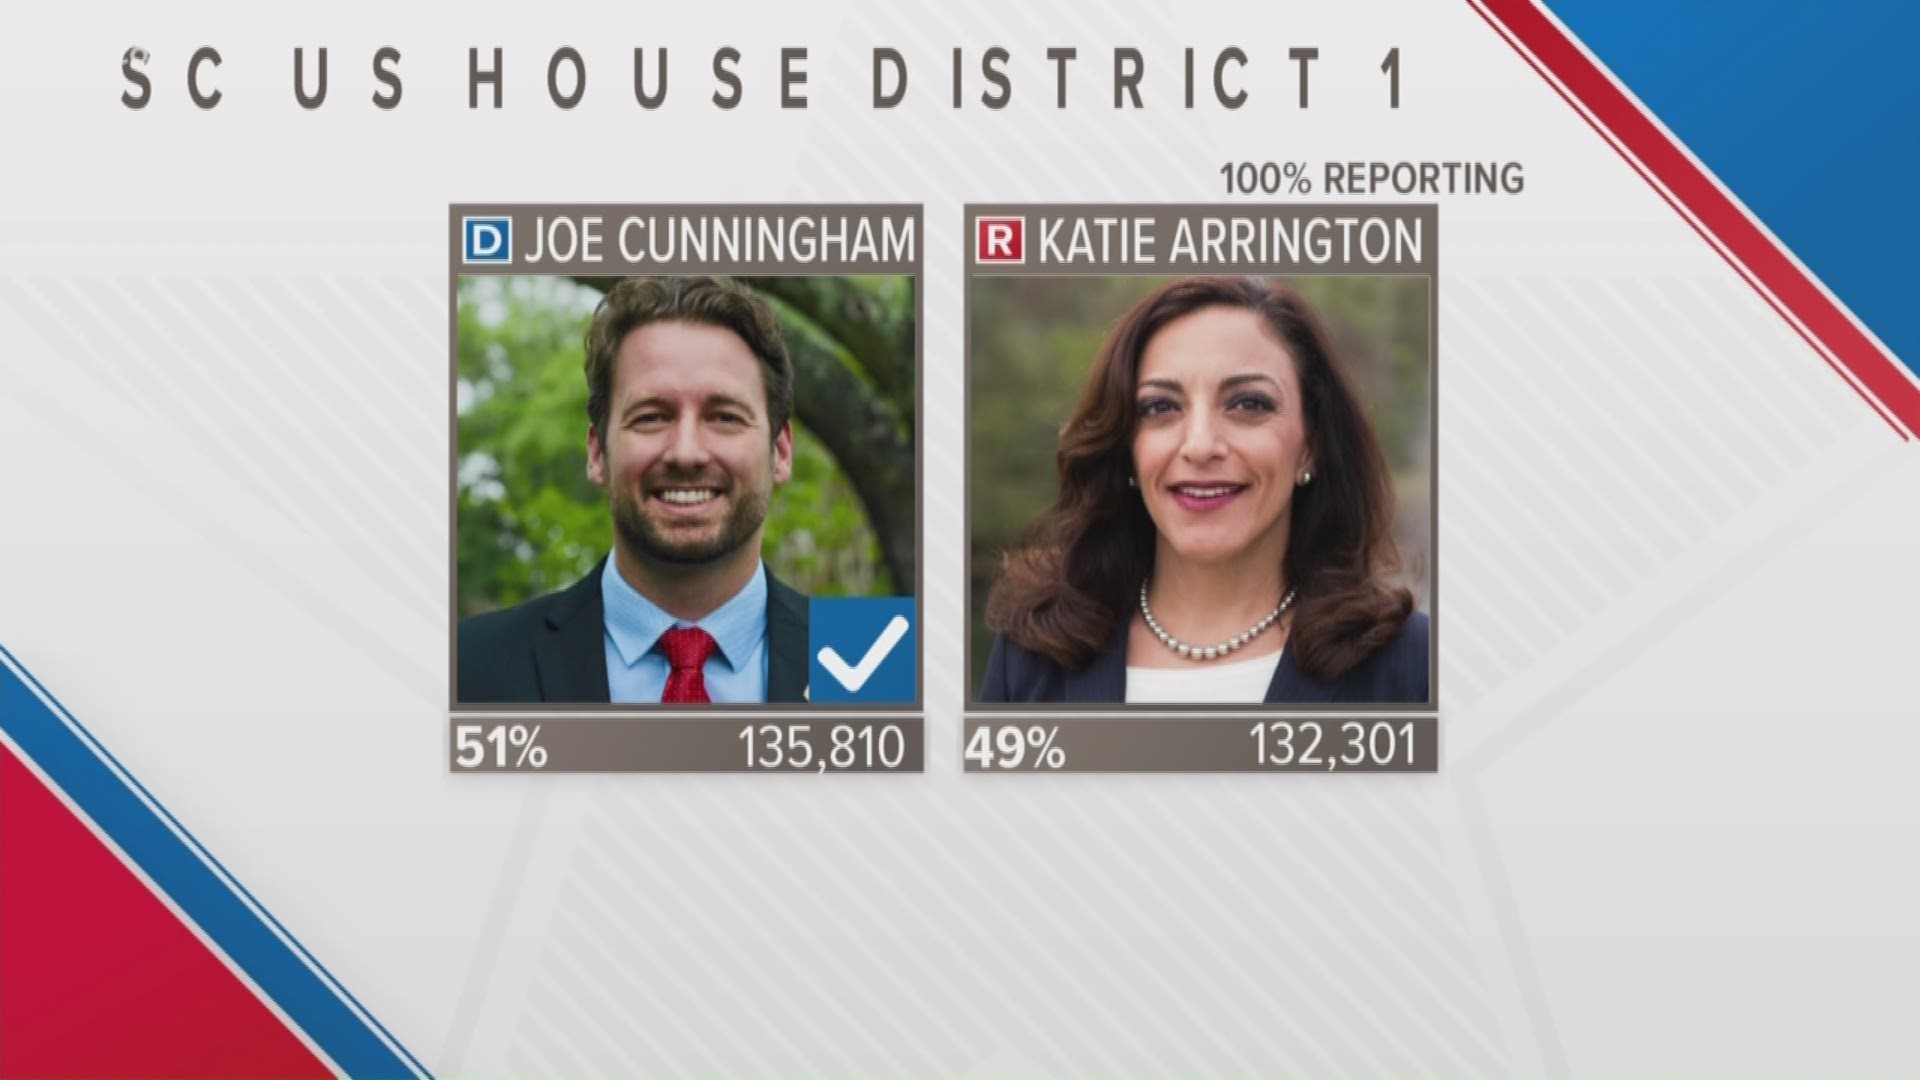 Democrat Joe Cunnigham beat Katie Arrington for US House 1, becoming the first Democrat to hold that seat since 1981.